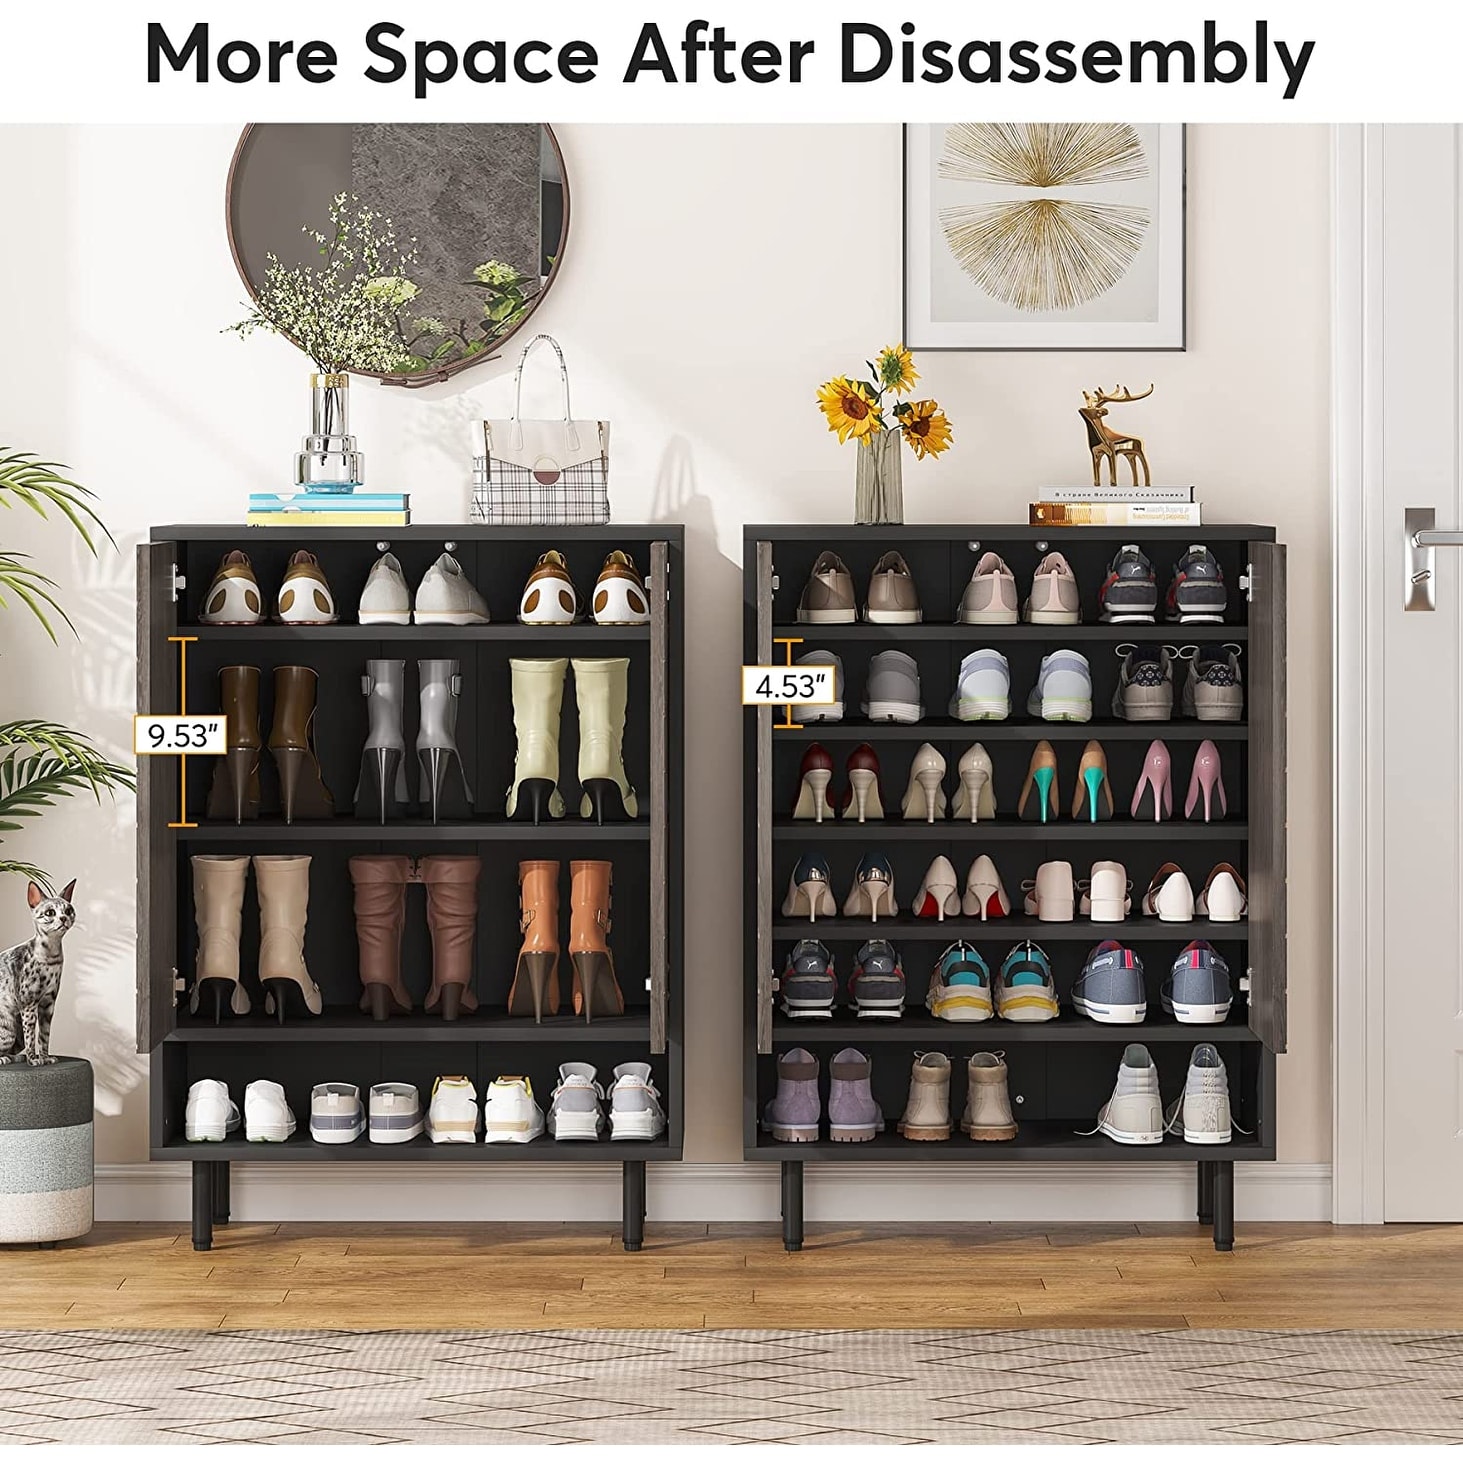 https://ak1.ostkcdn.com/images/products/is/images/direct/f935e61b6708d3584c08f689a5eca7489d38941b/Entryway-Shoe-Storage-Cabinet-Shoe-Rack-Organizer-Cabinet-with-Door.jpg